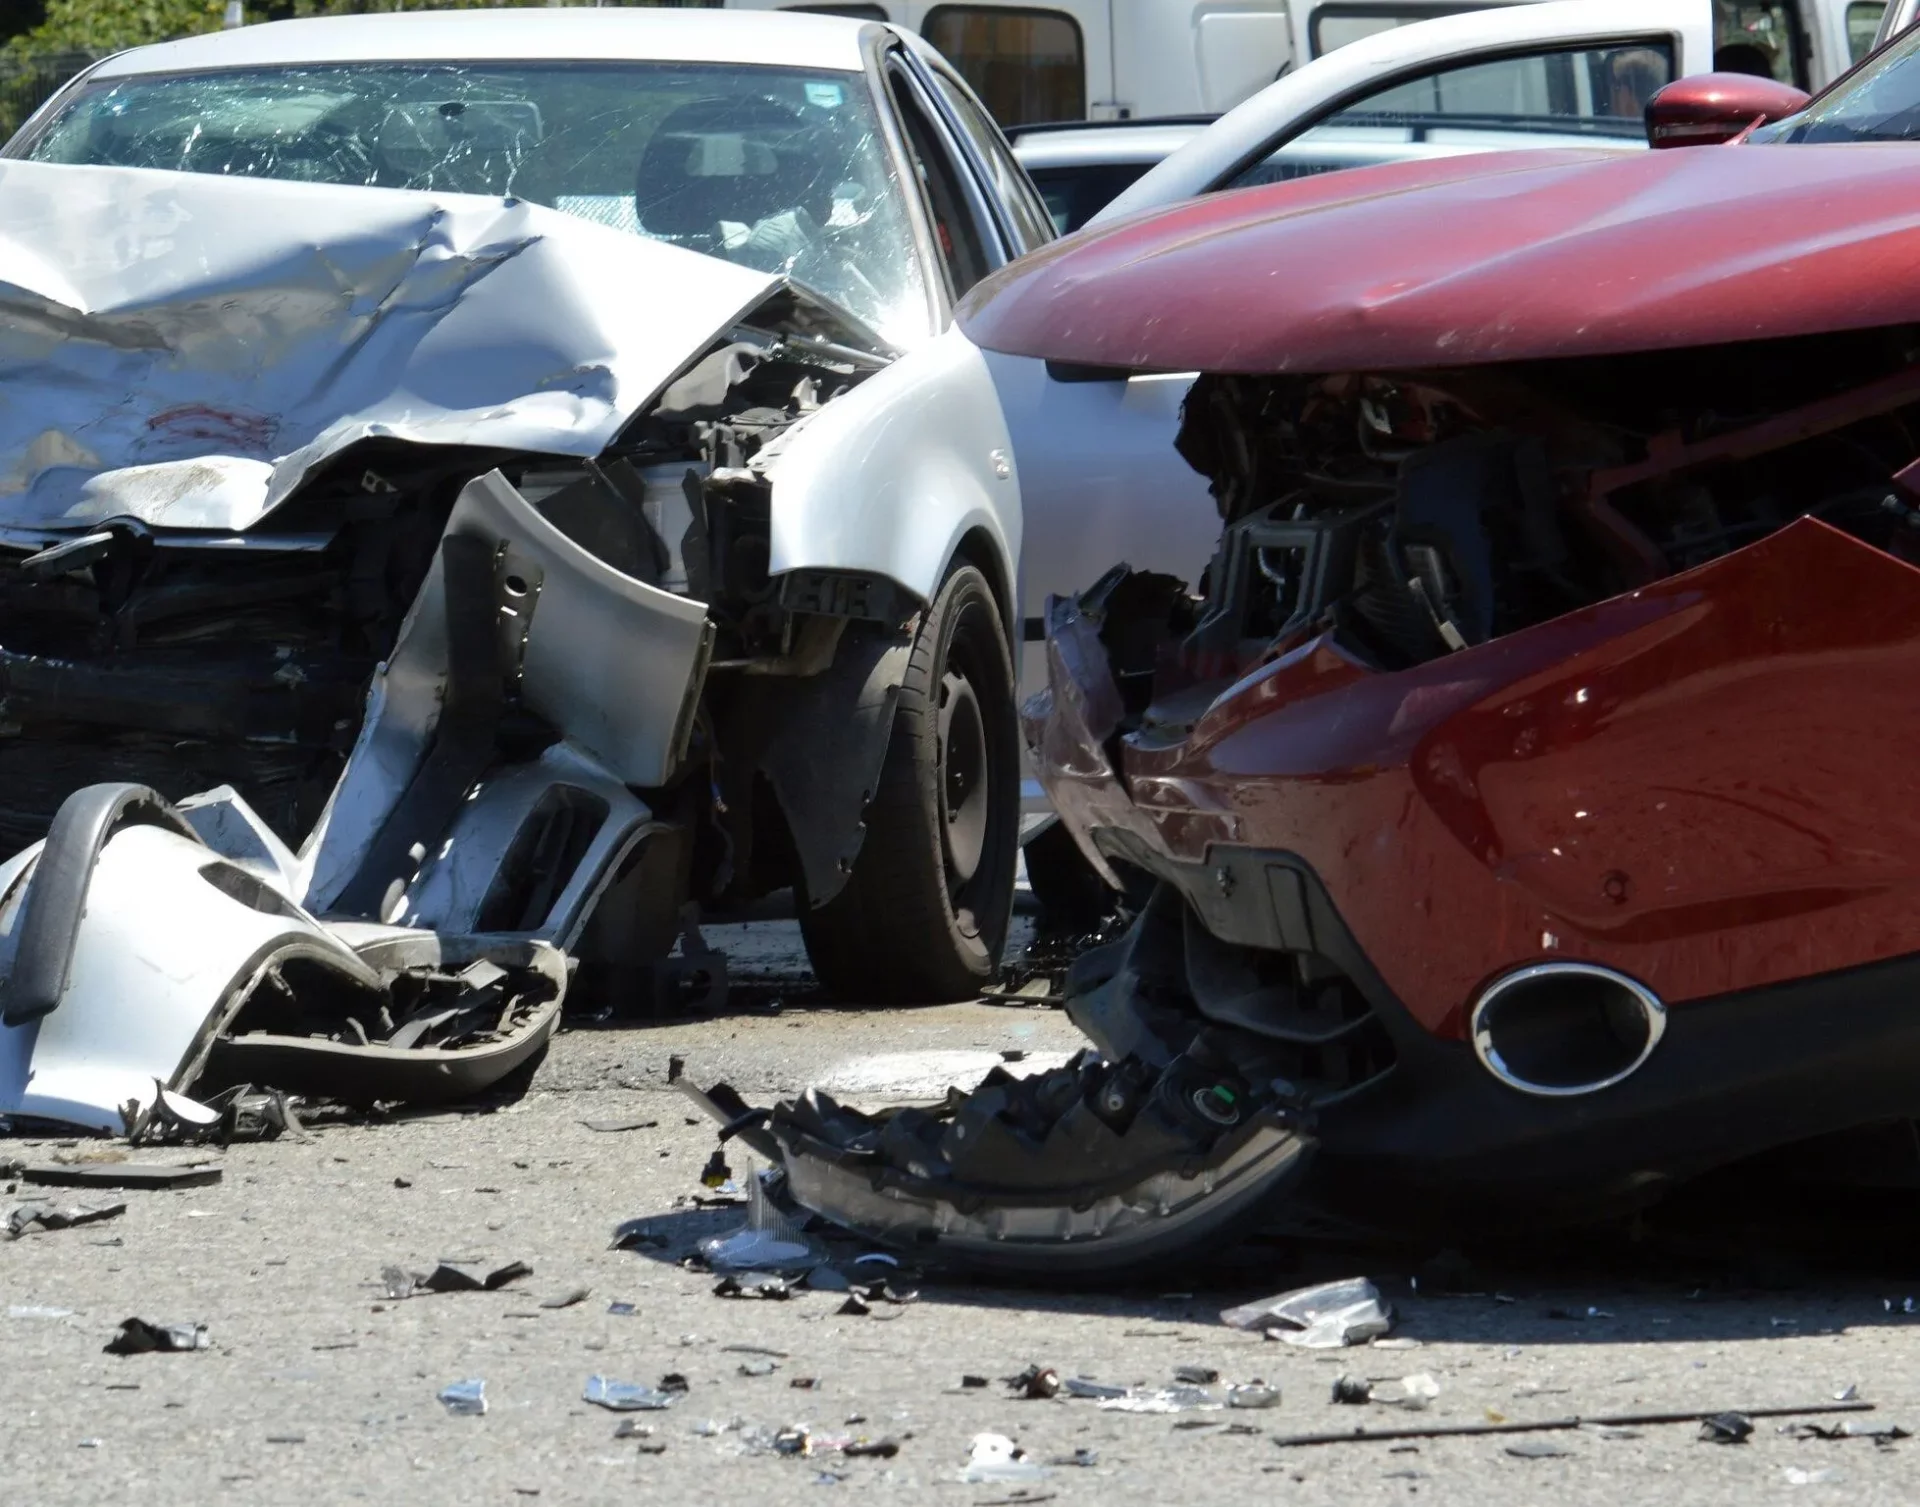 Understanding Rear End Crash Impact: Types of Injuries and Treatment Options